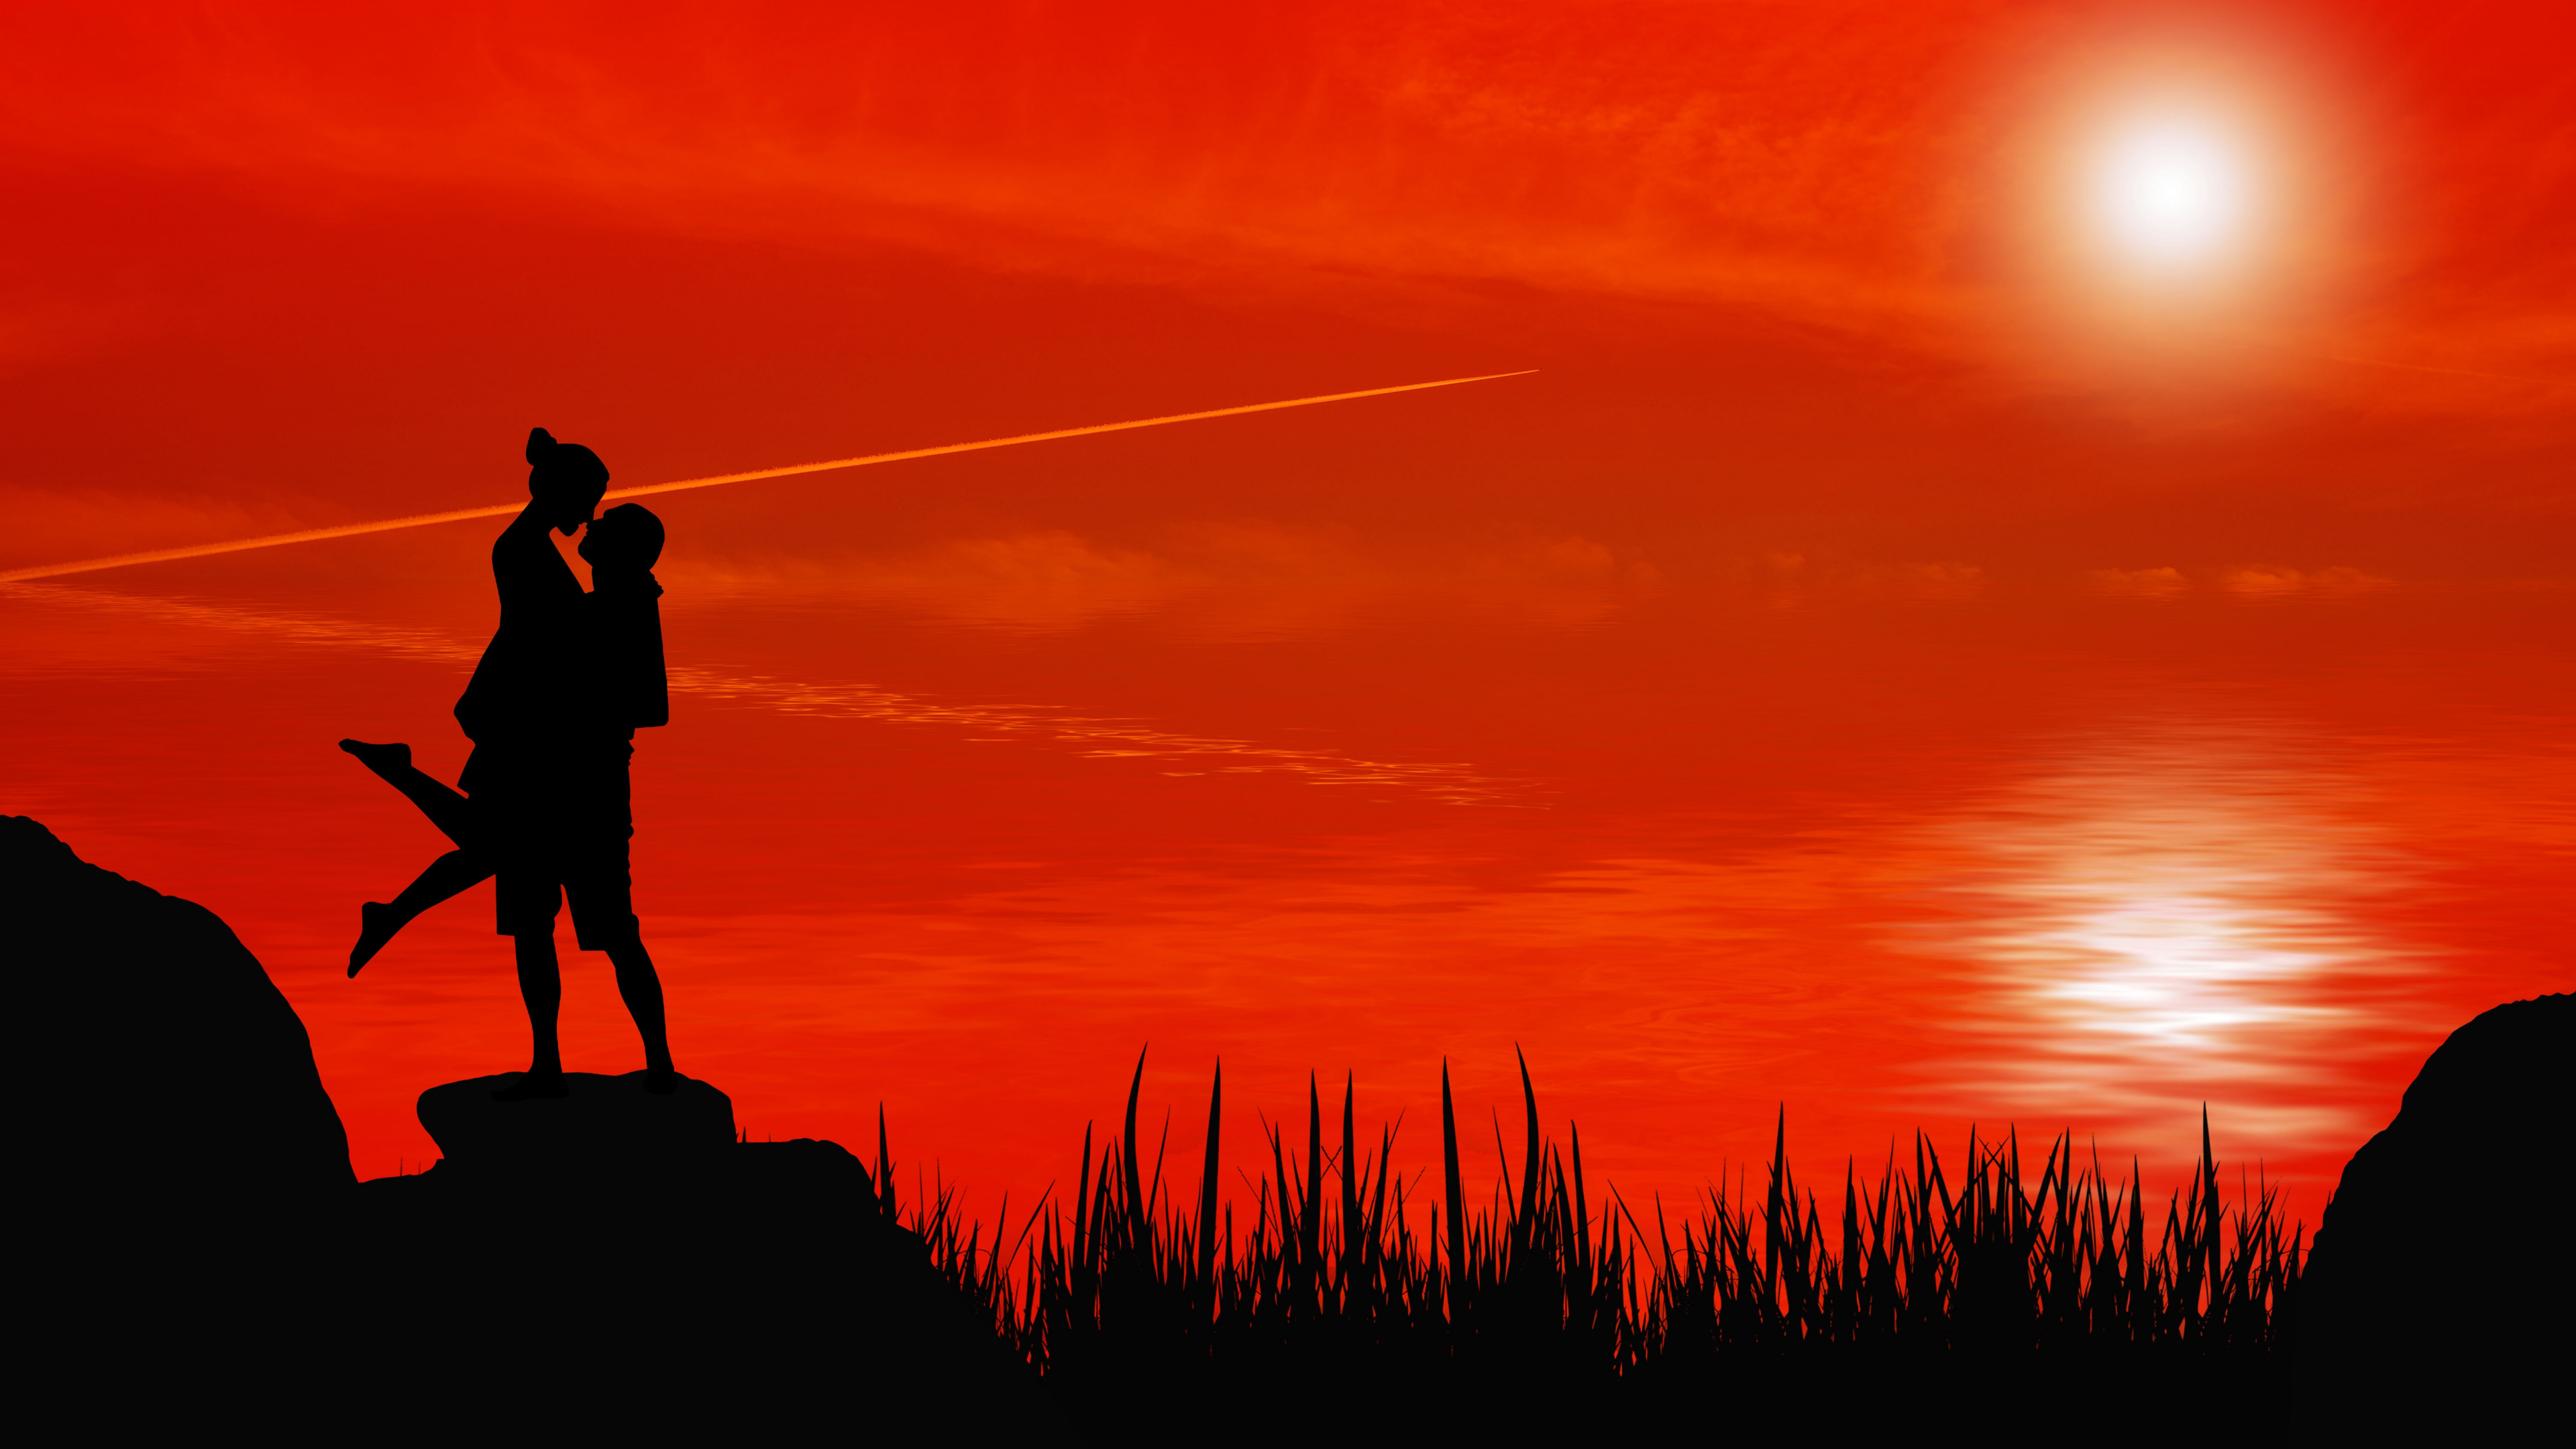 Silhouette, Sunset, Passion, People in Nature, Red. Wallpaper in 3840x2160 Resolution